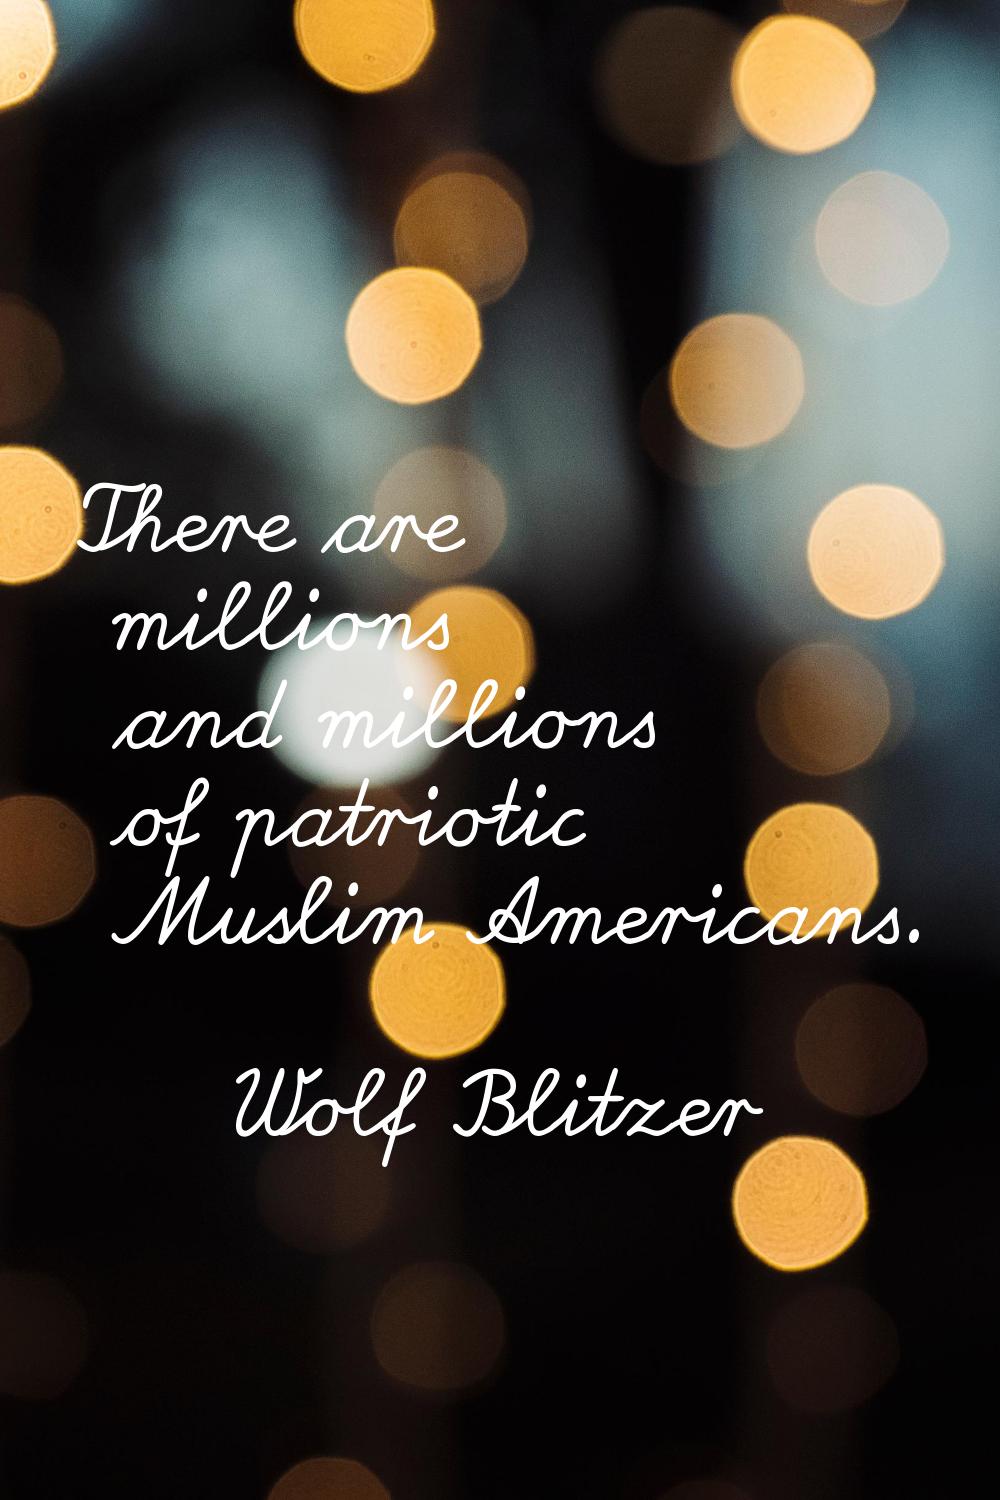 There are millions and millions of patriotic Muslim Americans.